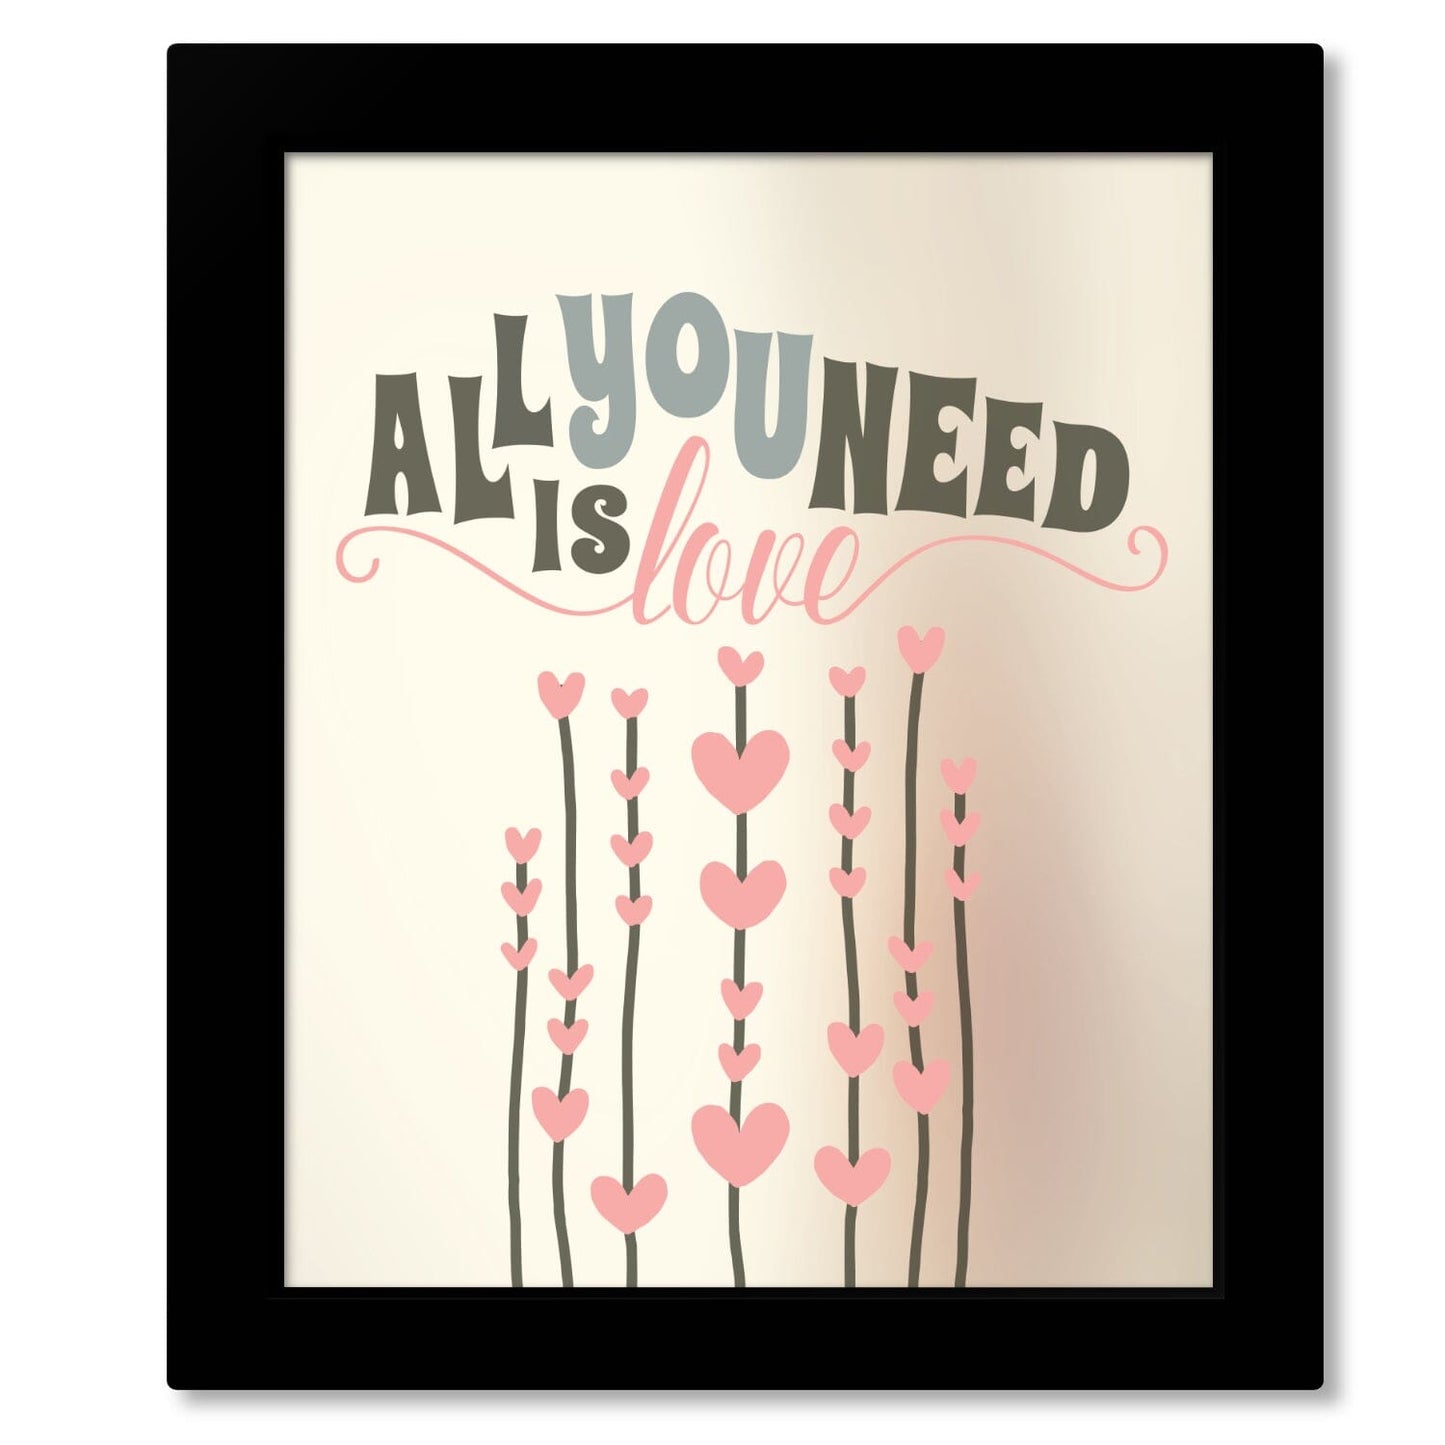 All You Need is Love by the Beatles - Song Lyric Art Print Song Lyrics Art Song Lyrics Art 8x10 Framed Print (without mat) 